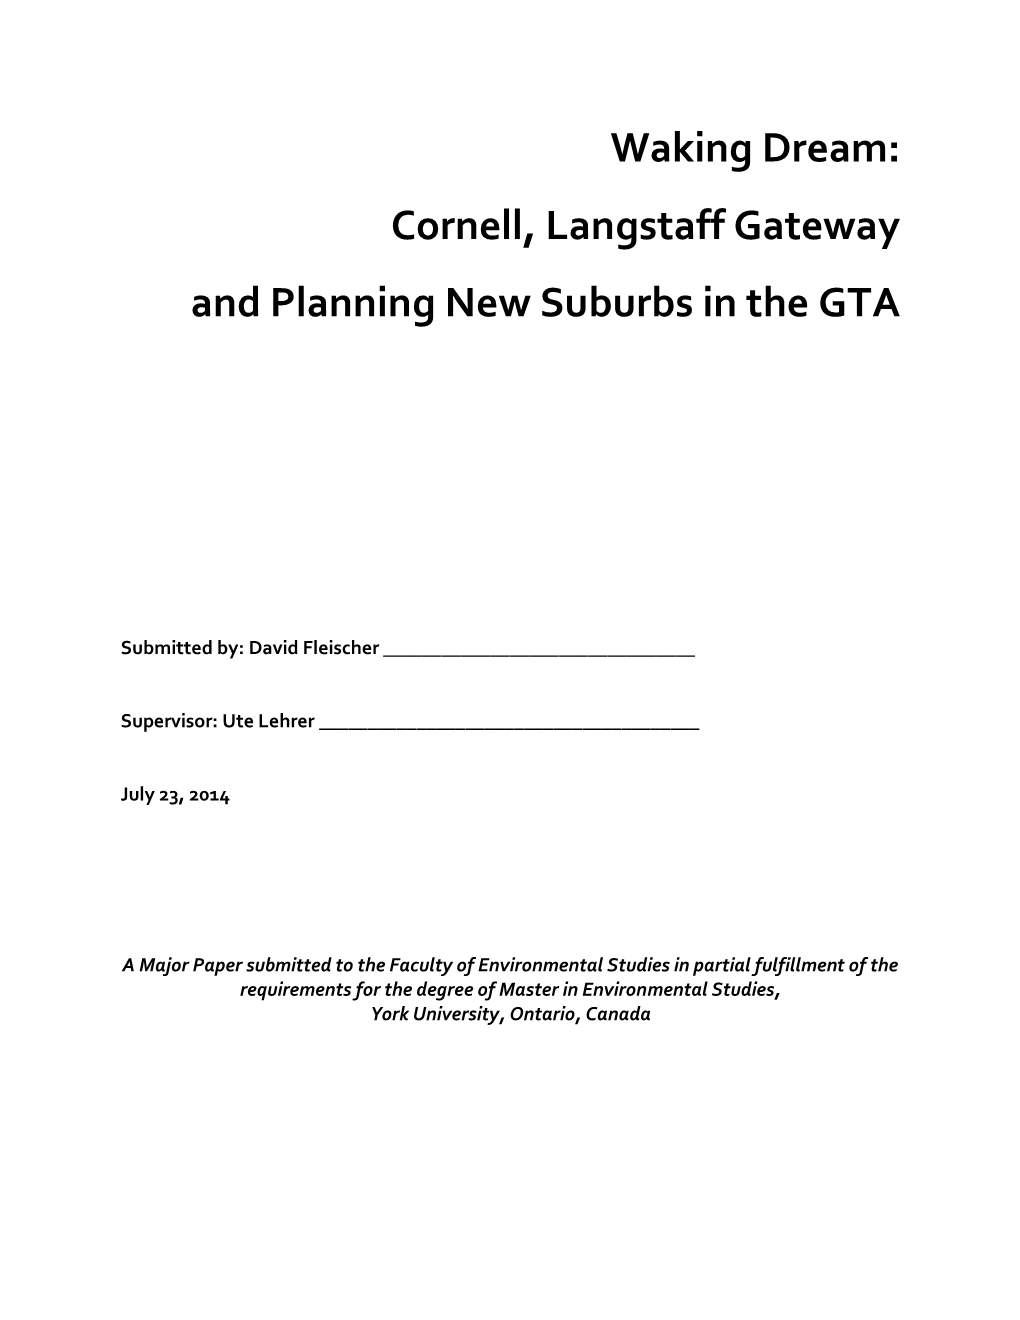 Cornell, Langstaff Gateway and Planning New Suburbs in the GTA